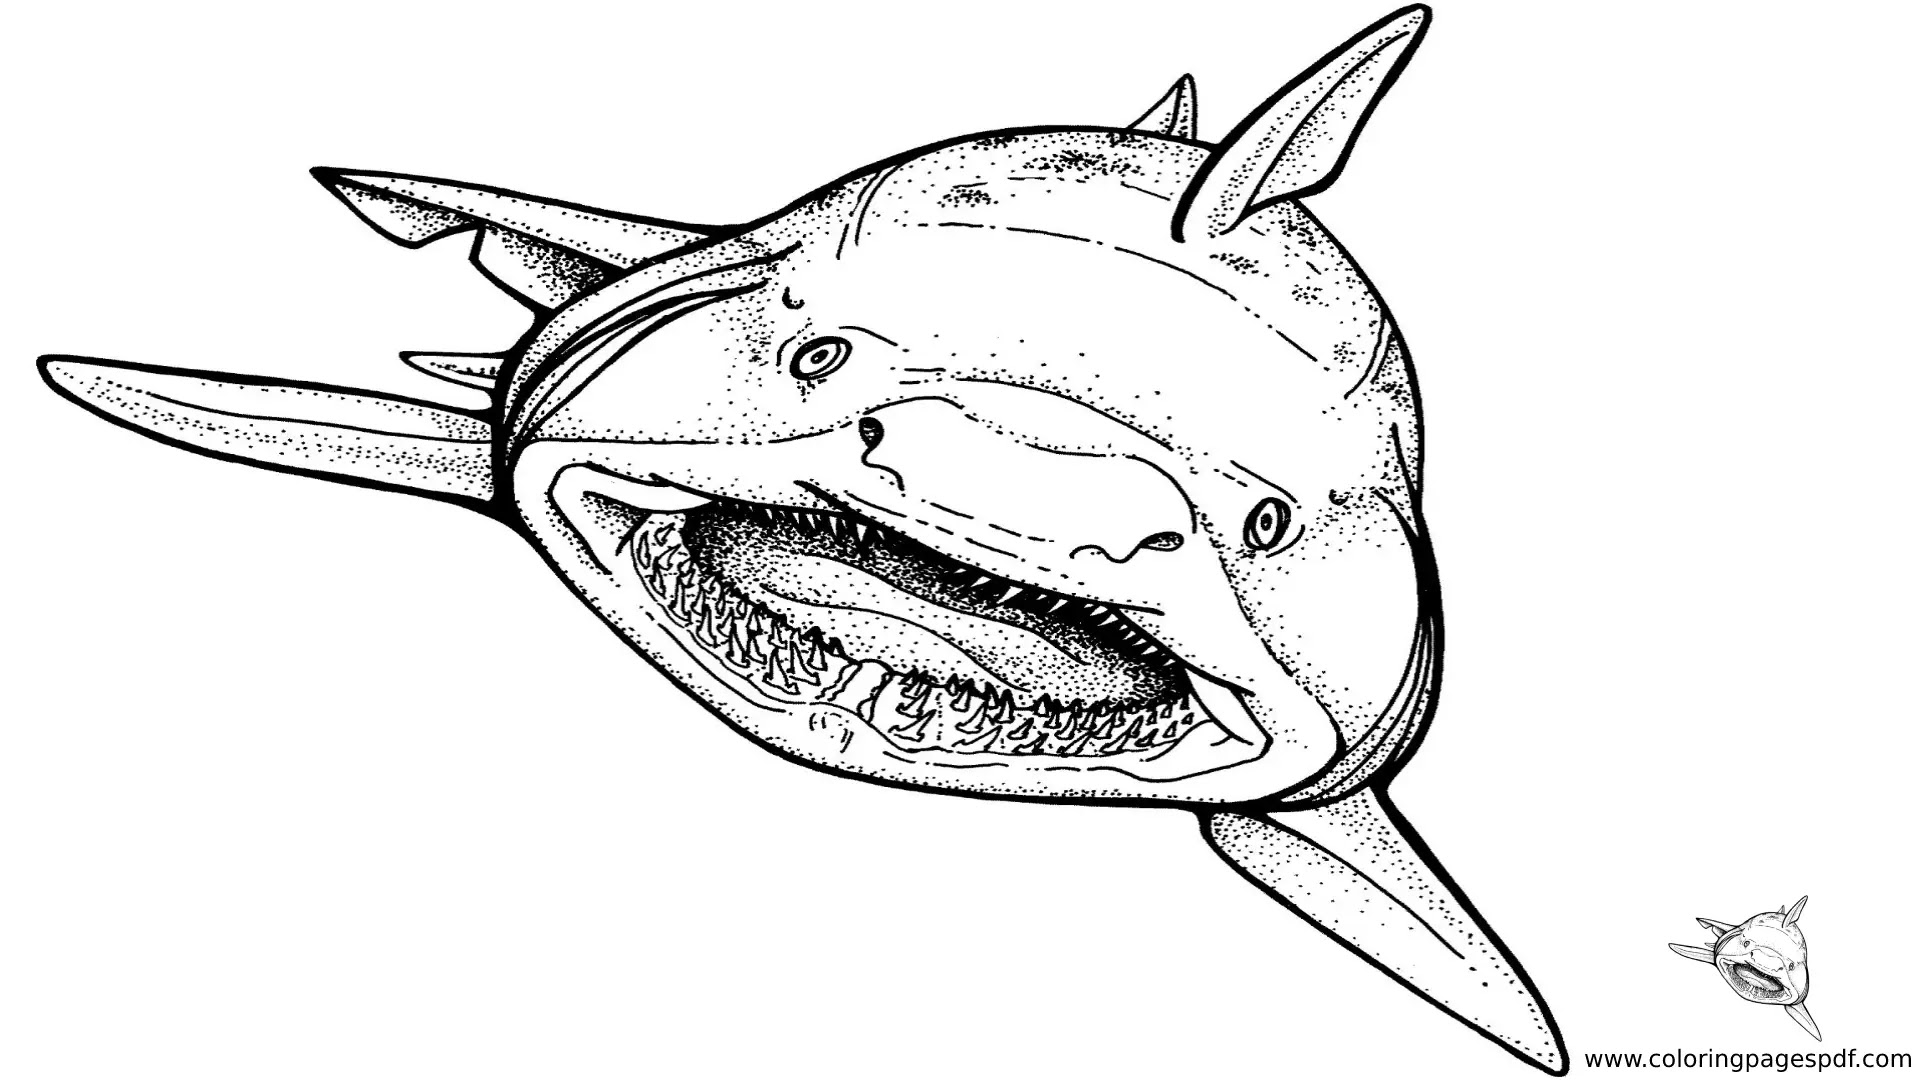 Coloring Pages Of A Big Shark